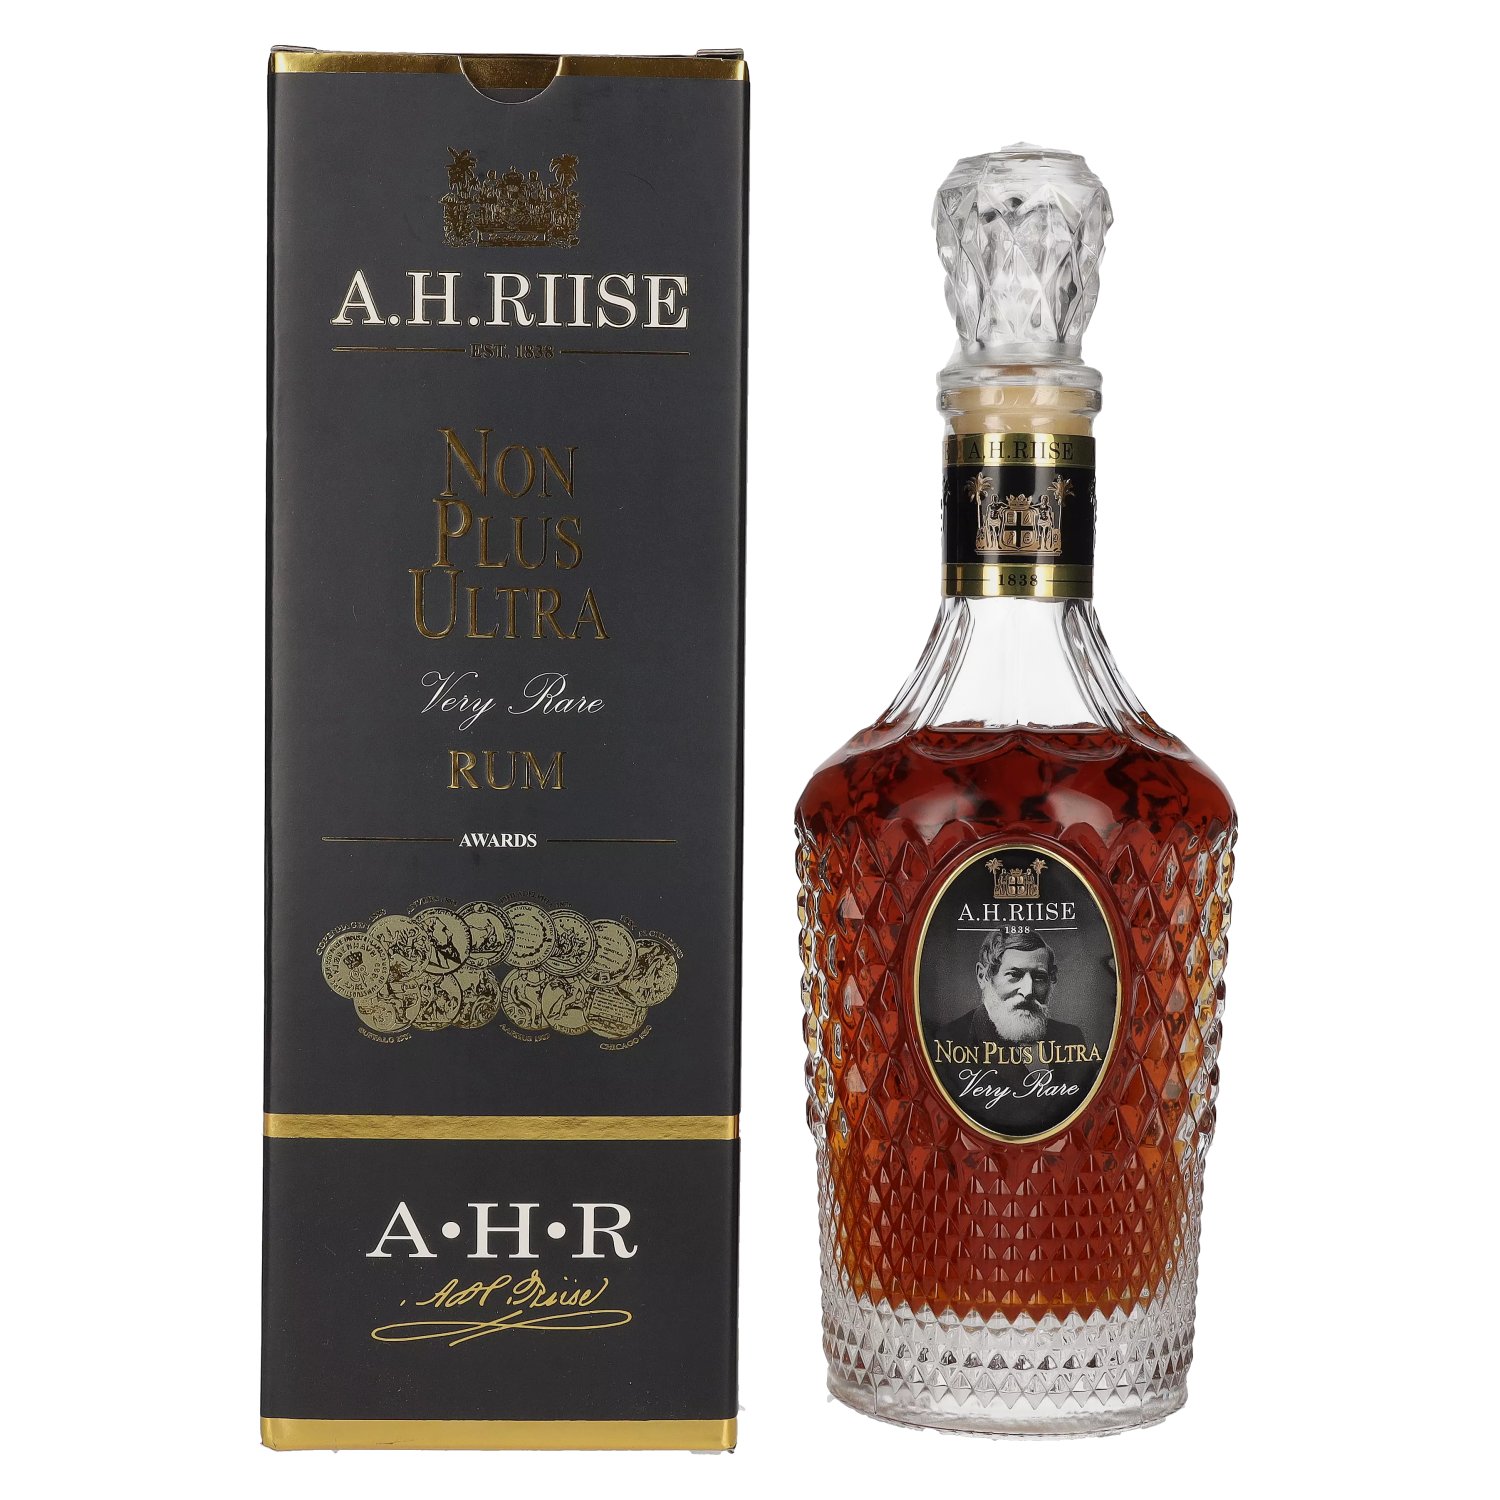 A.H. Riise NON PLUS Rare 42% 0,7l - ULTRA Very Edition in Vol. Giftbox Old Rum